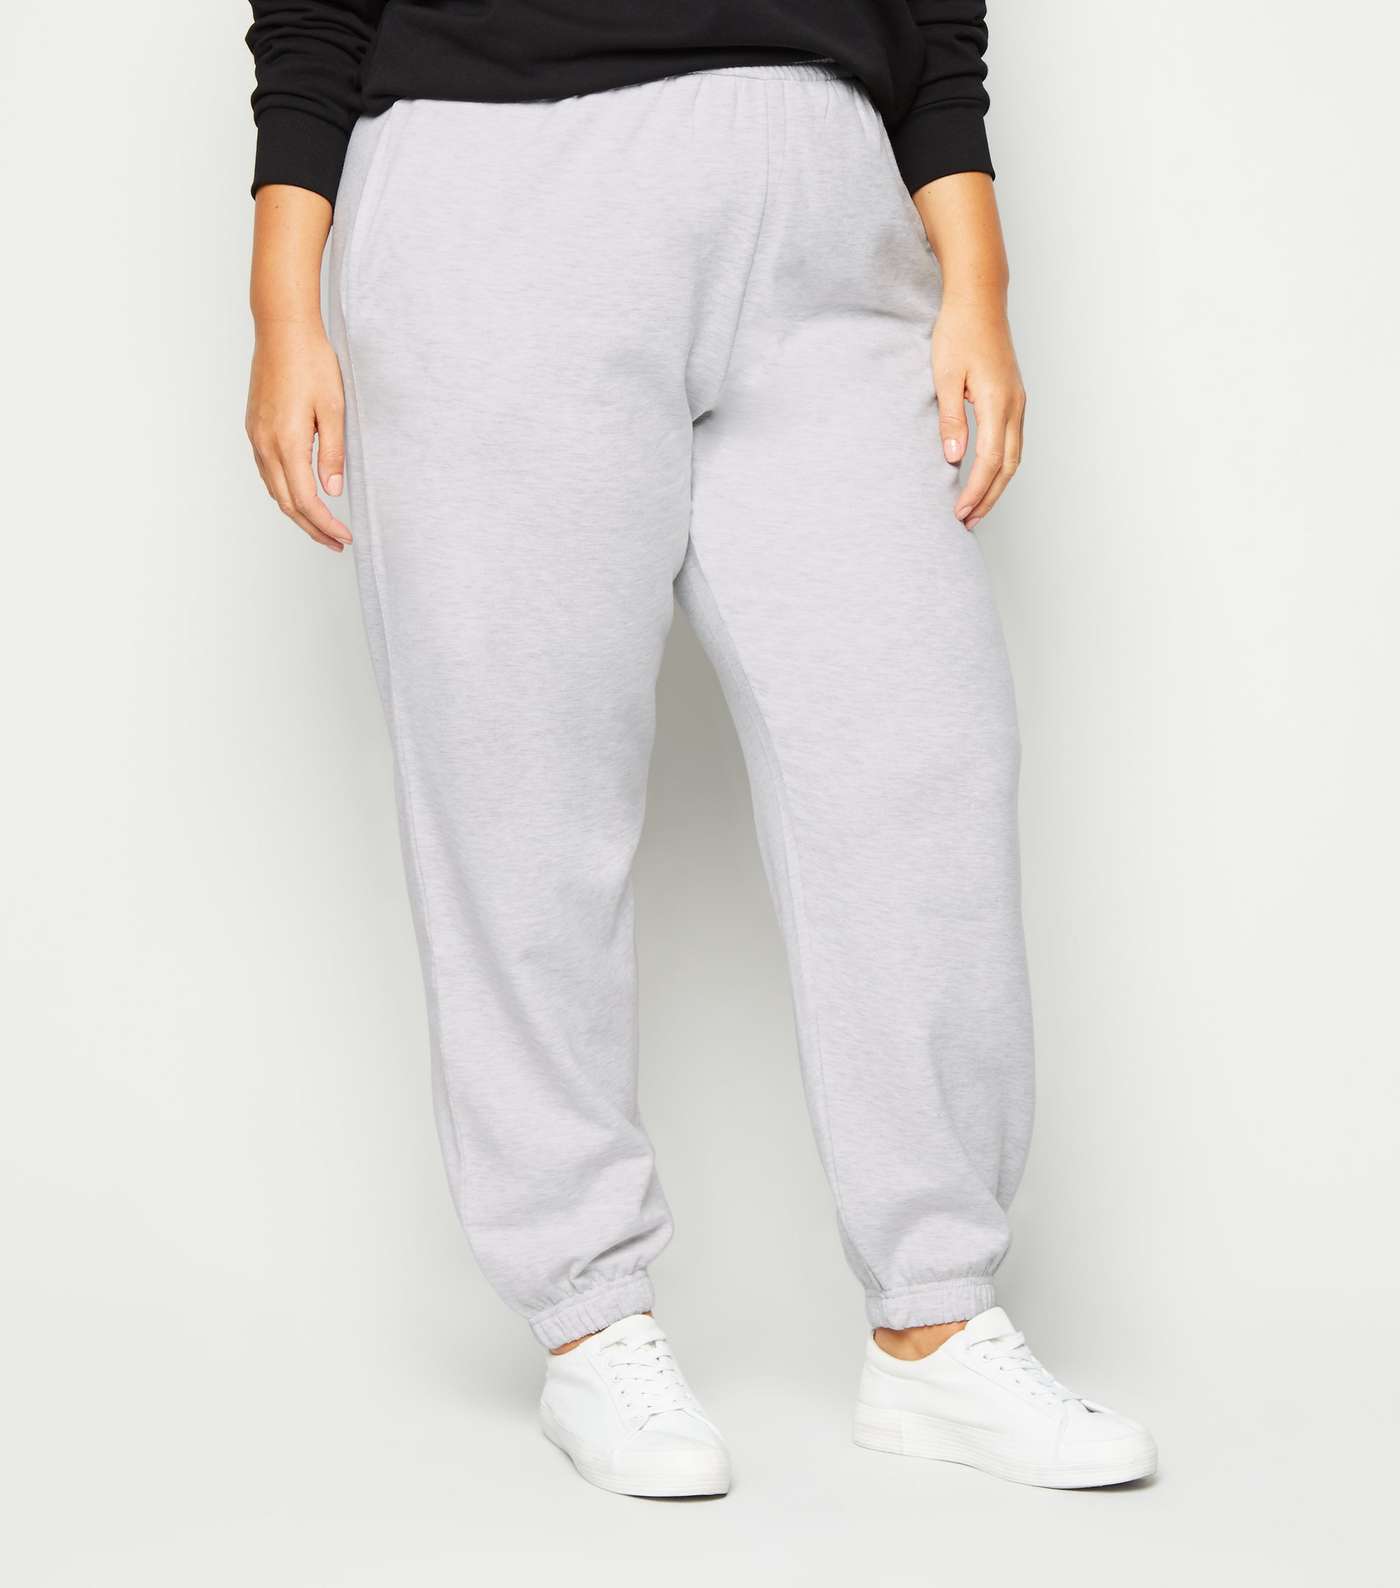 Curves Grey Cuffed Joggers Image 2